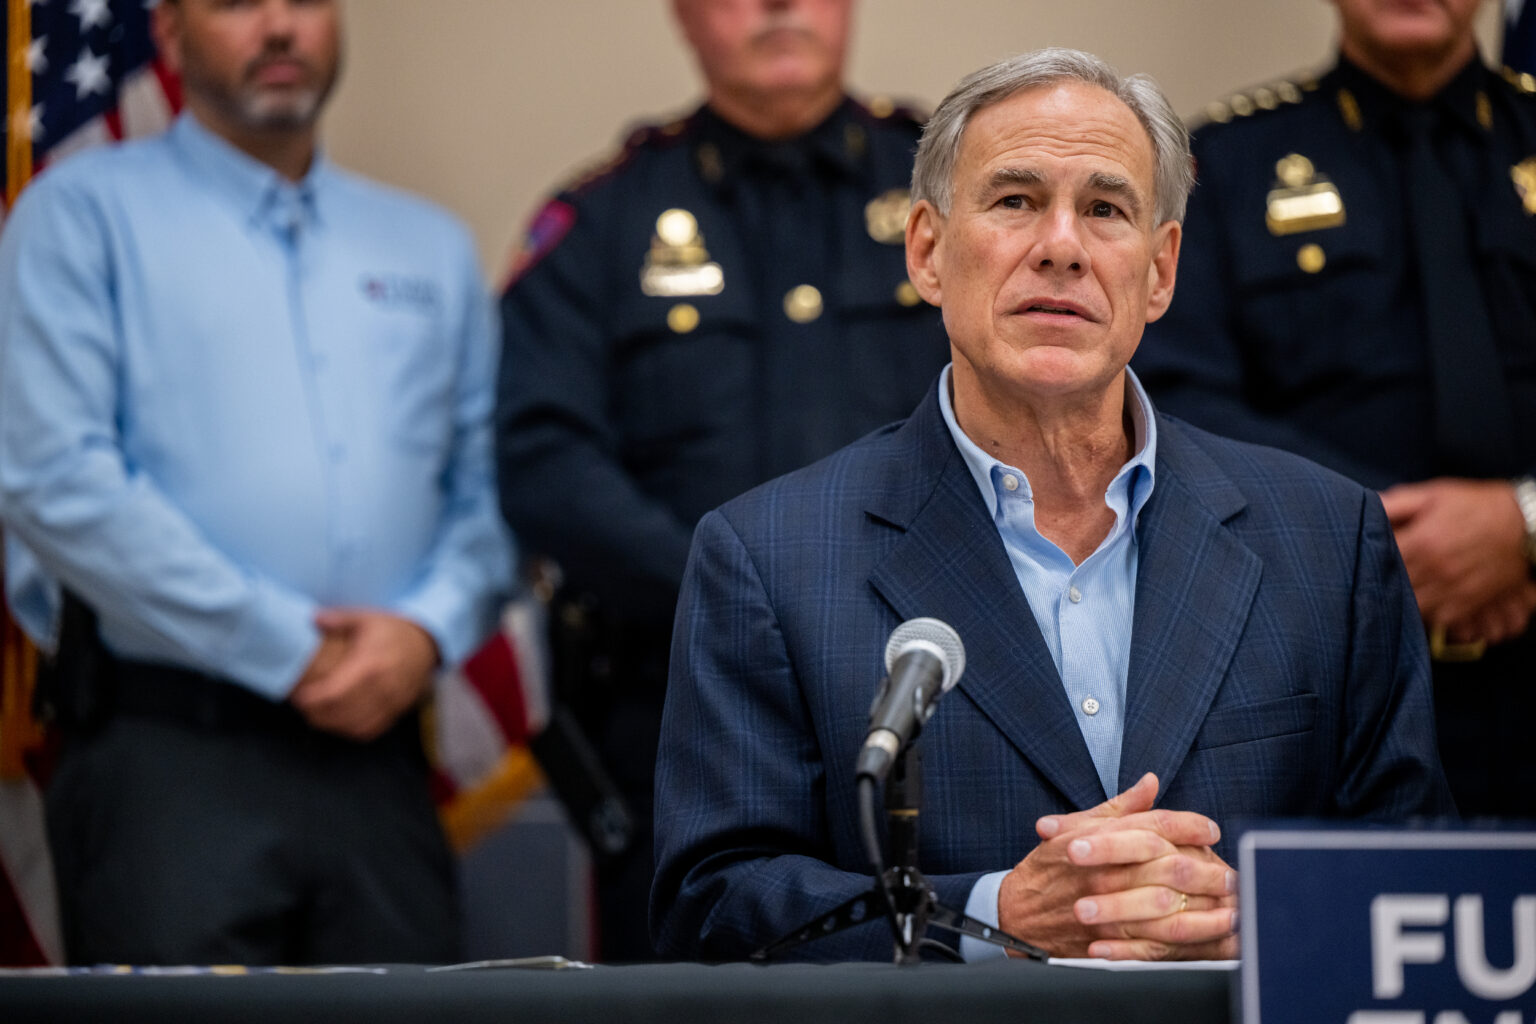 The Texas governor says most gun crimes involve illegally owned weapons.  That is not true for mass shootings.

End-shutdown